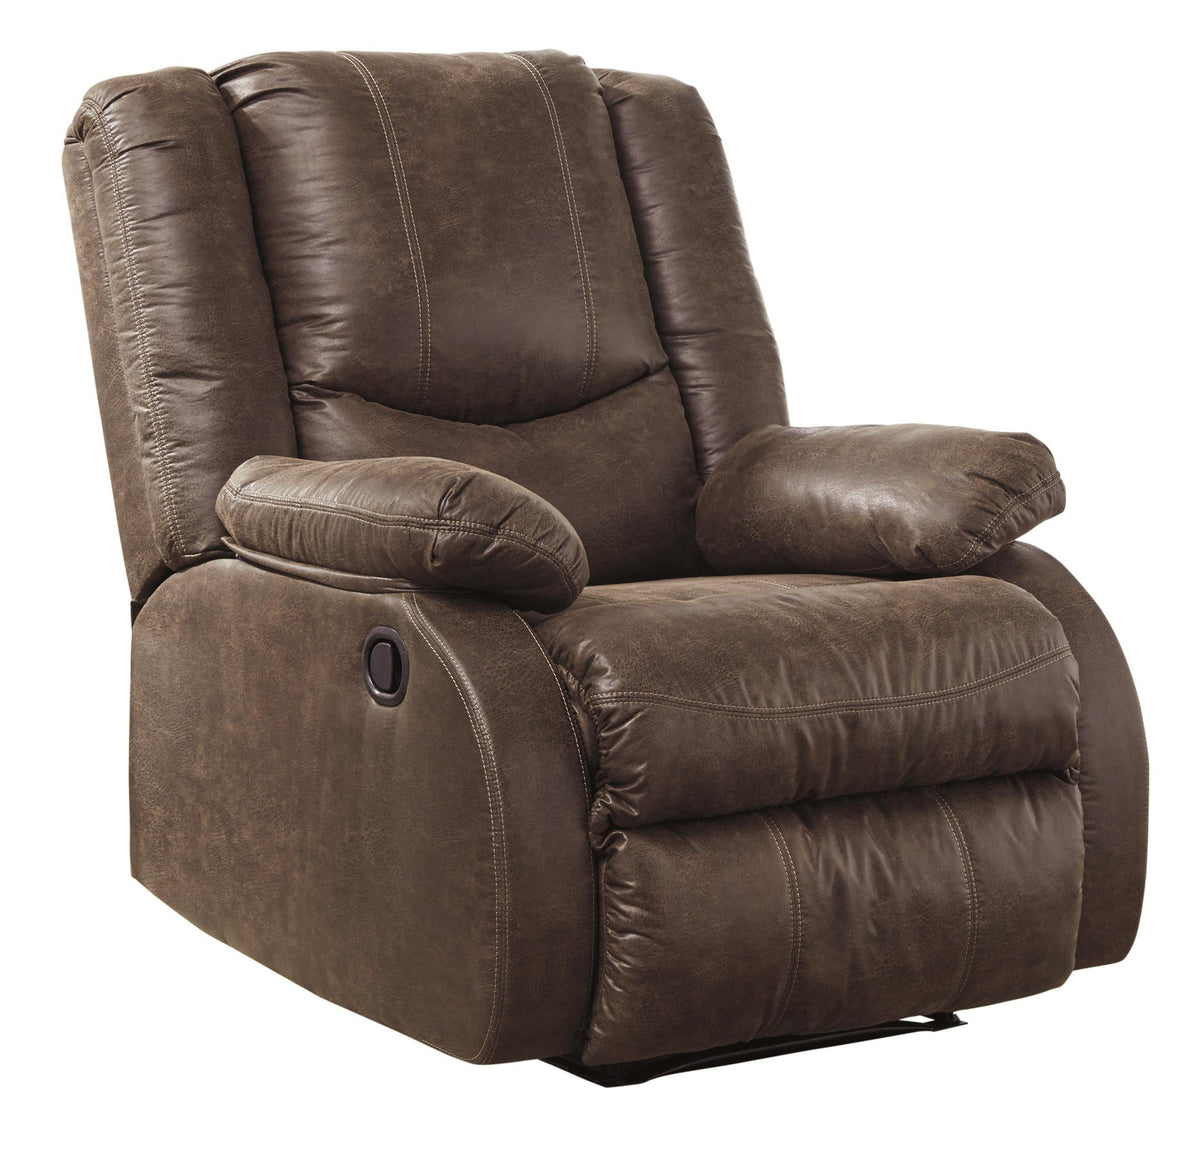 33 Inch Zero Wall Recliner, Vegan Faux Leather, Tufted Back, Brown - BM210986